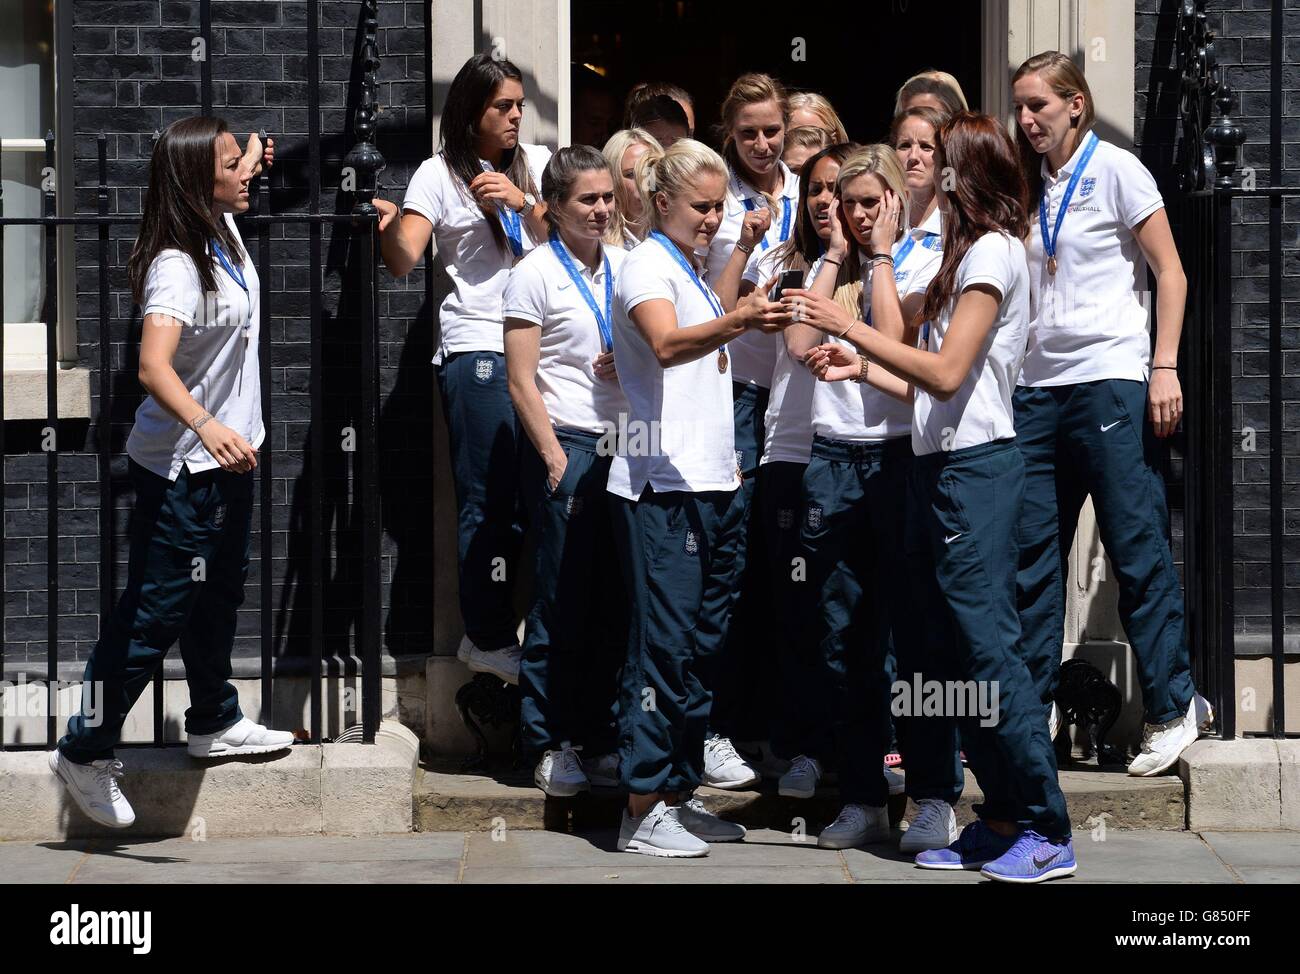 Members of England Women's Football team stand on the steps of 10 Downing Street, London, after a reception with Prime Minister David Cameron. Stock Photo